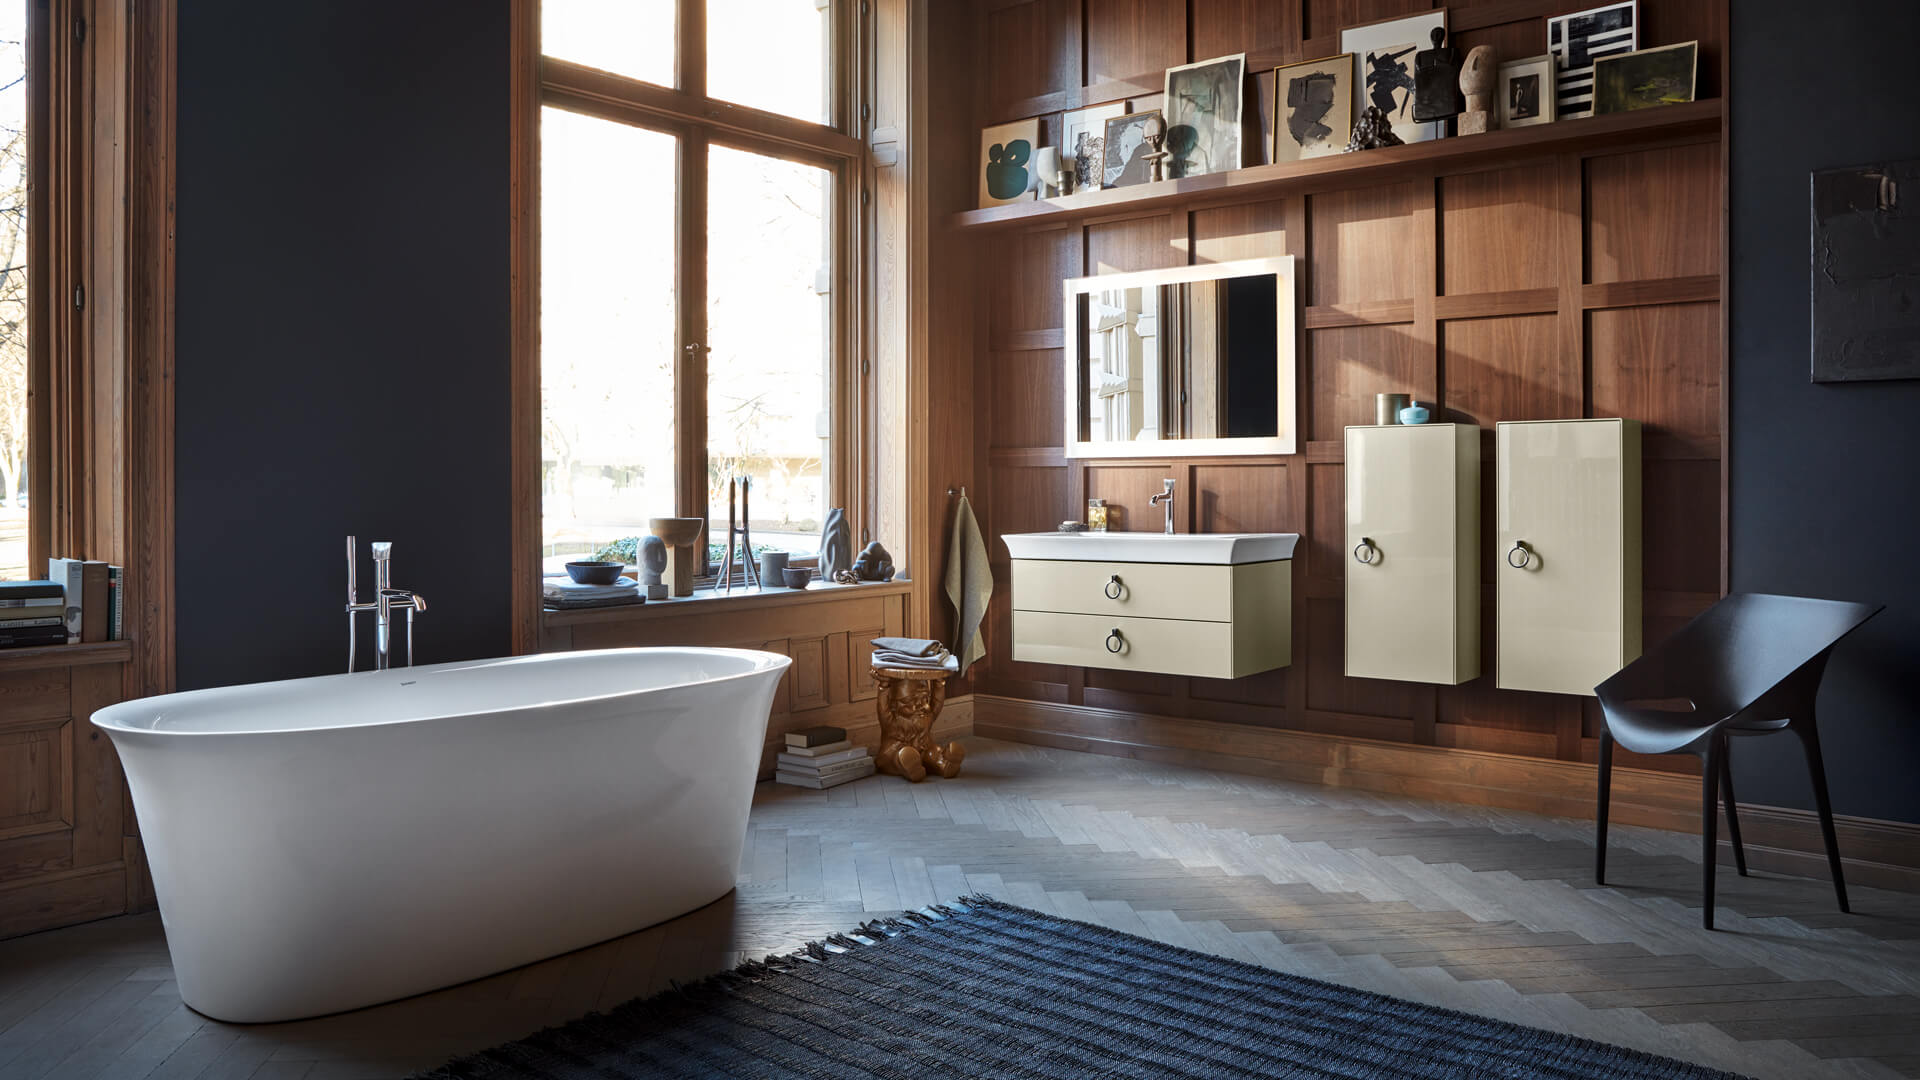 A warm and sophisticated bathroom with products from Duravit's White Tulip collection